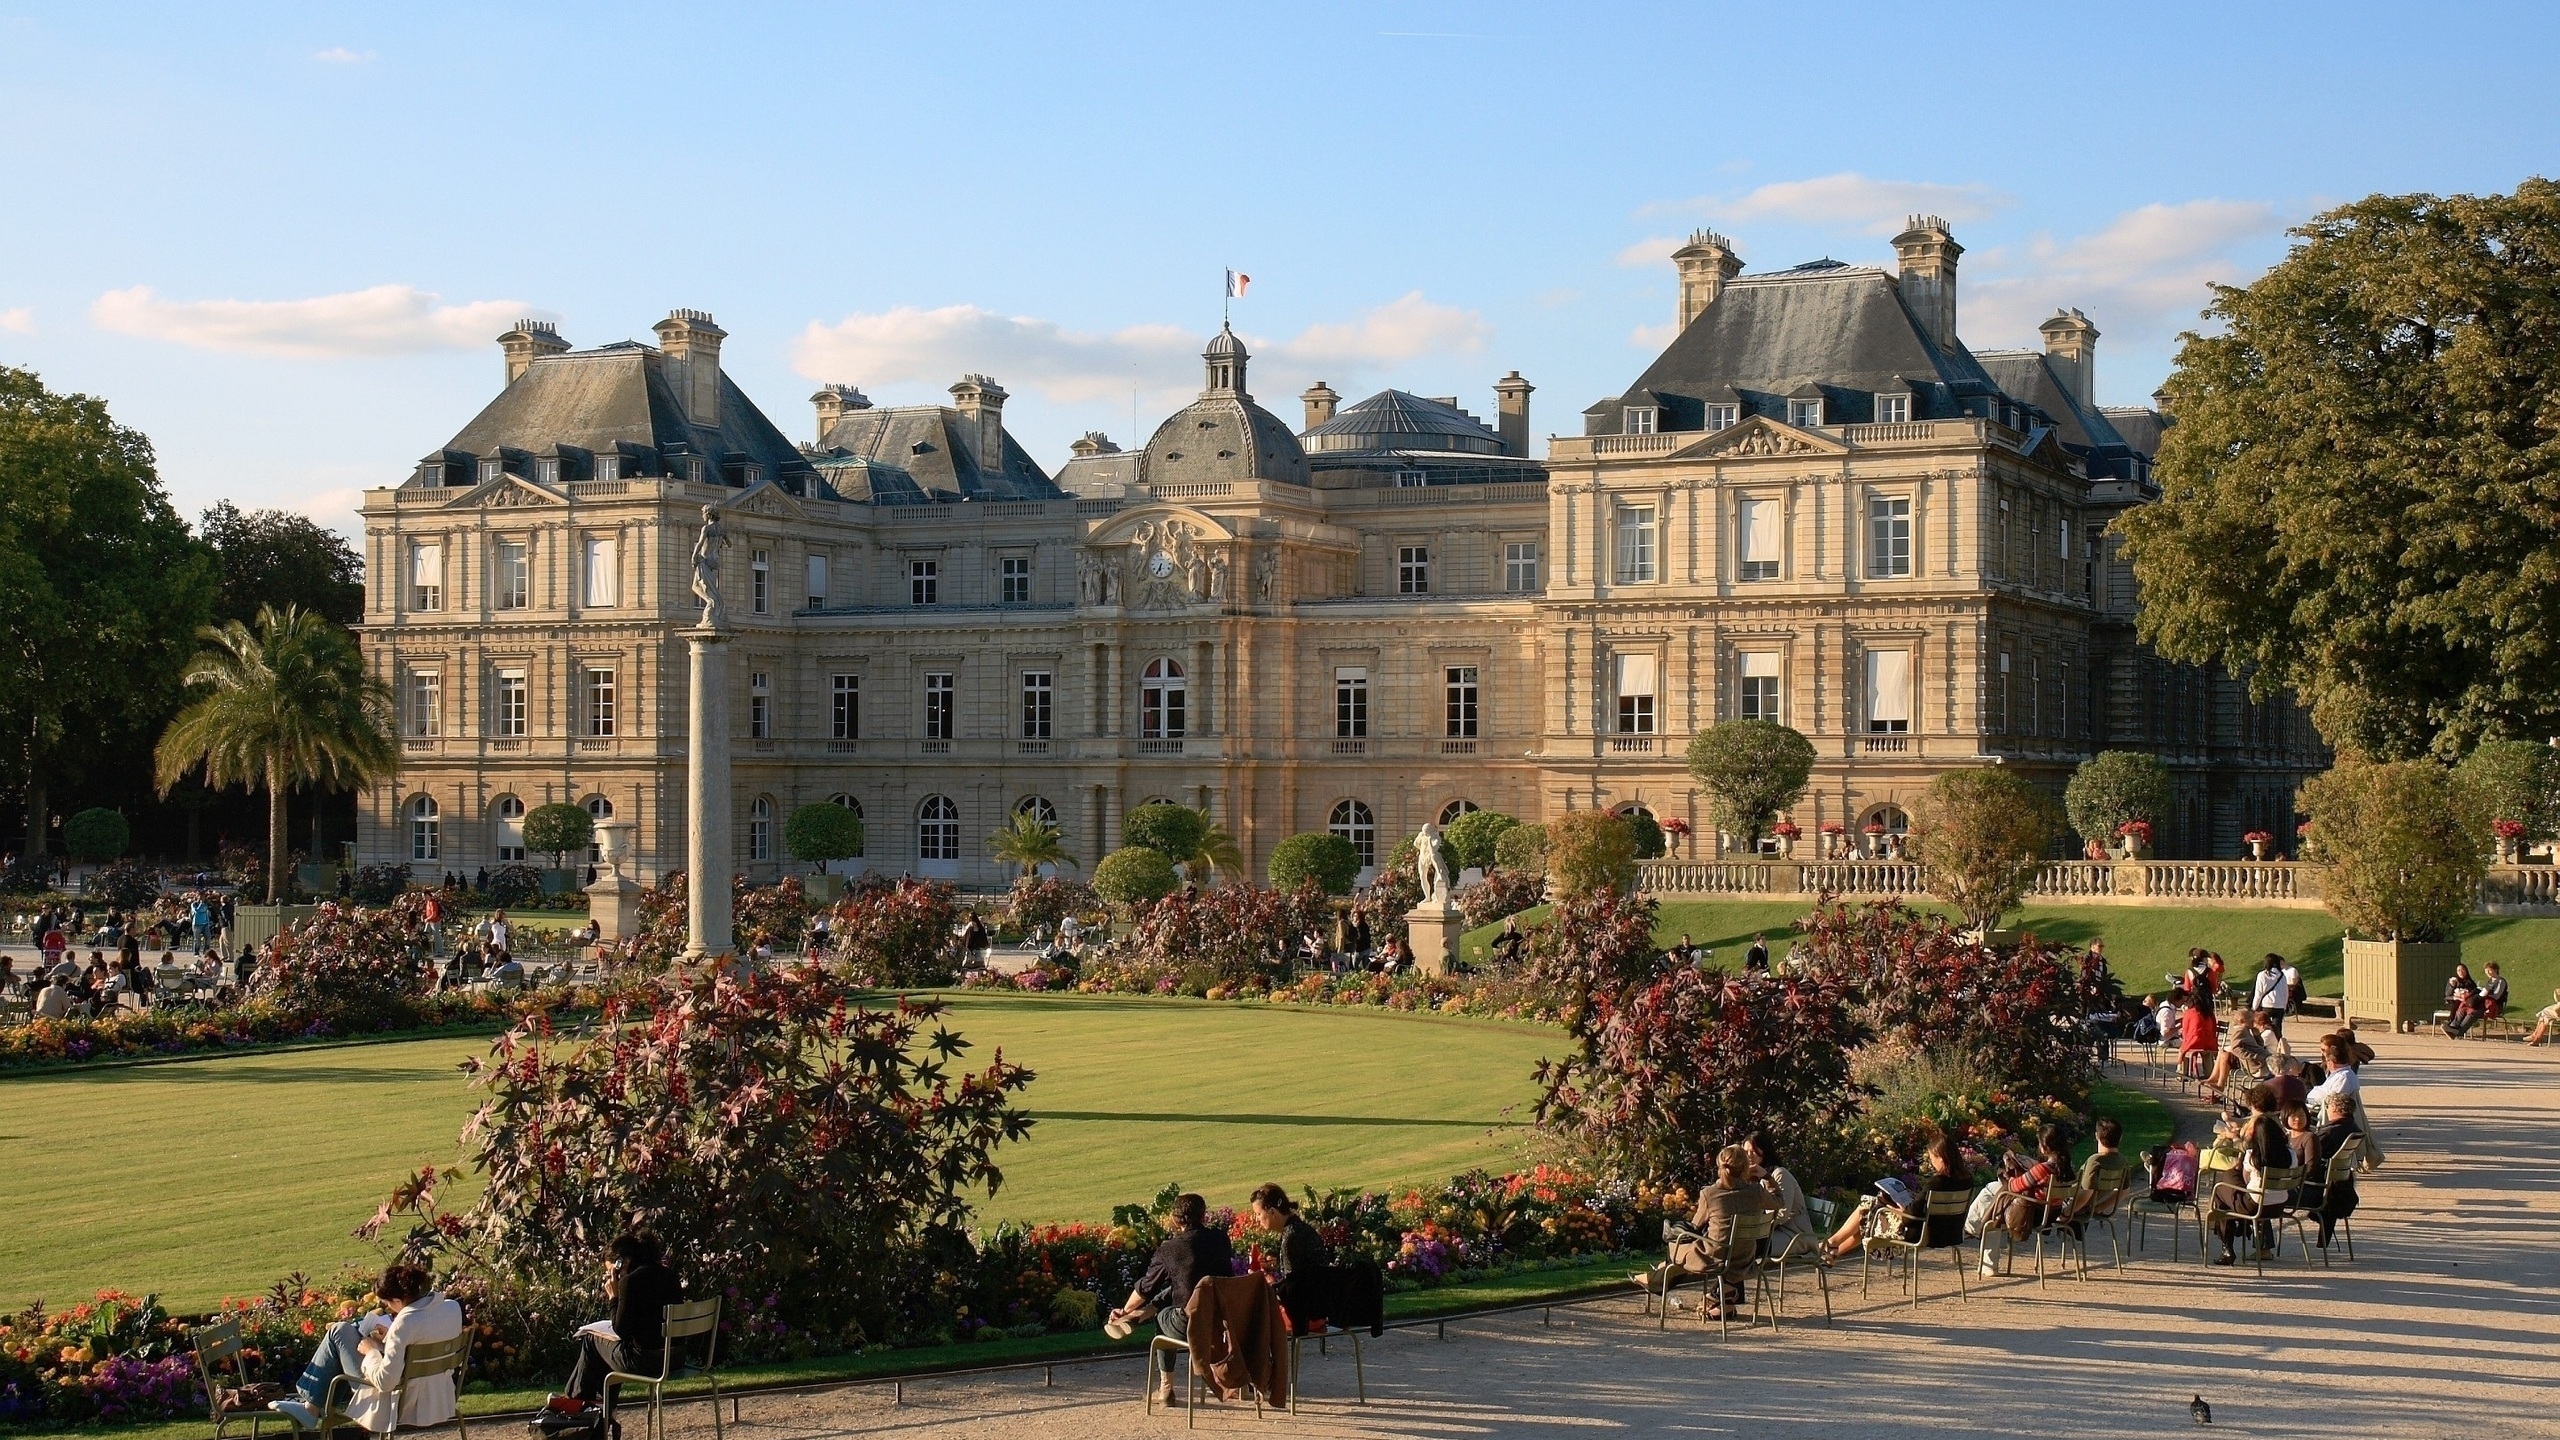 Luxembourg Palace Paris for 2560x1440 HDTV resolution